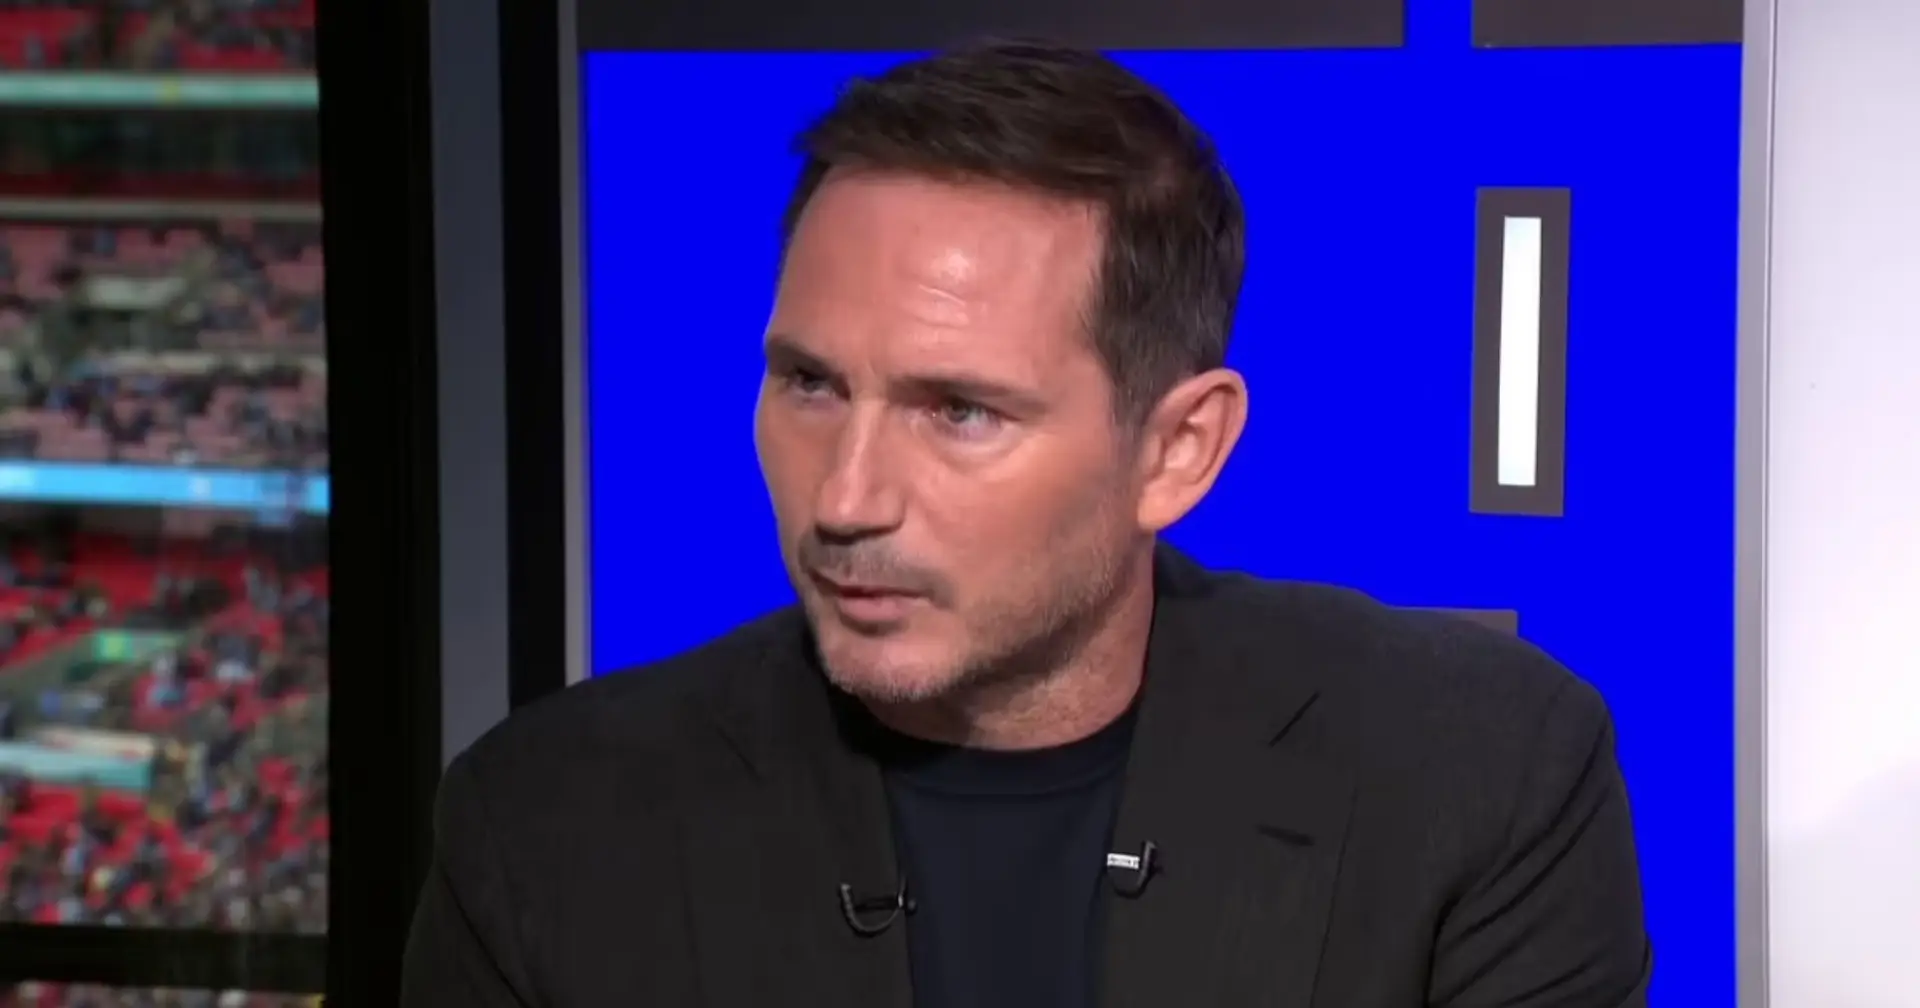 'You understand the inconsistency': Frank Lampard backs the process at Chelsea